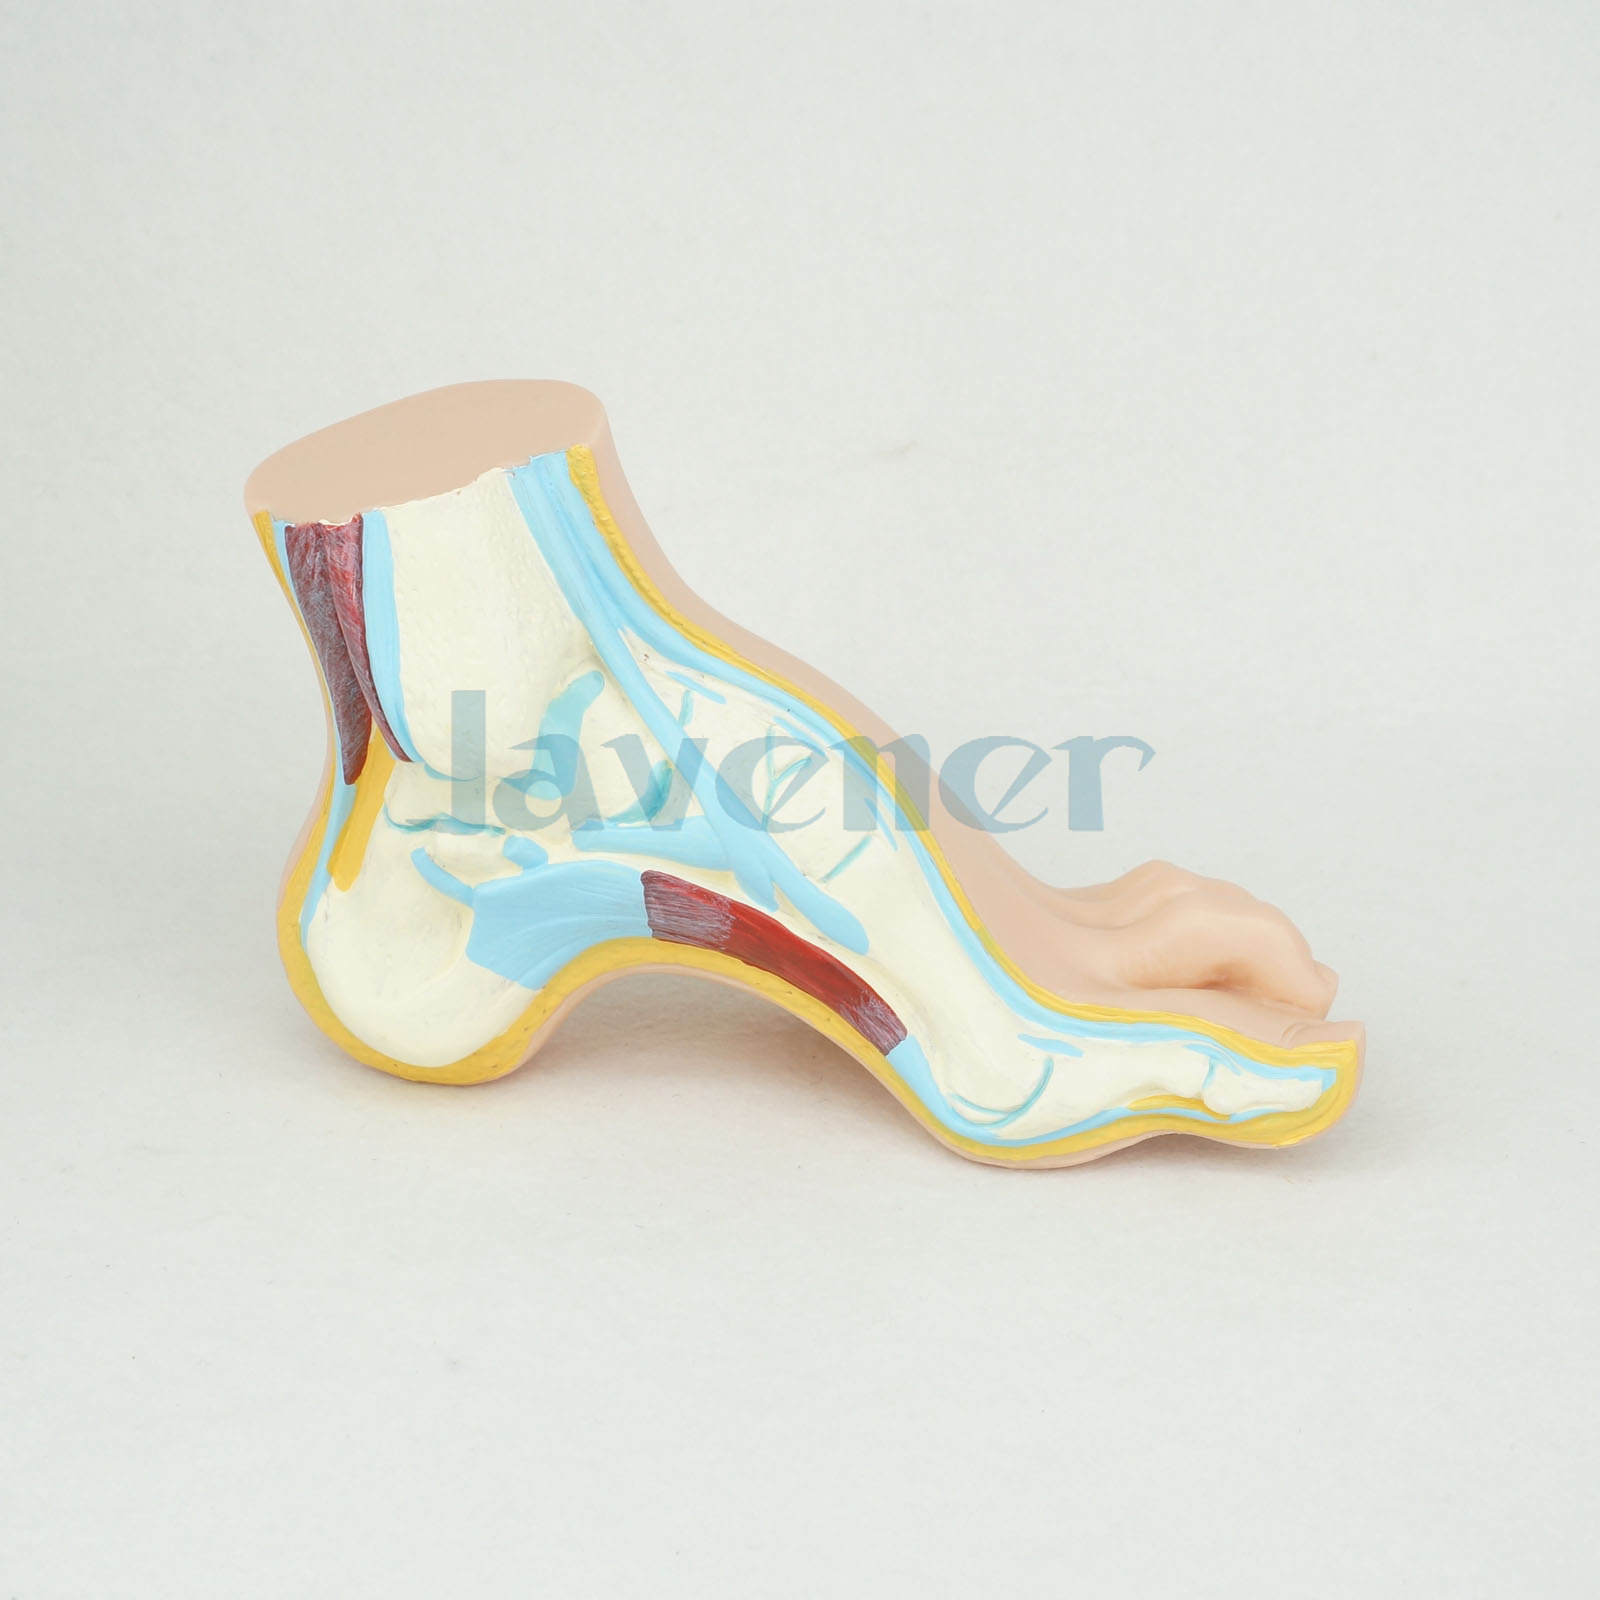 Normal Human Foot Platypodia Bow Foot Anatomy Model Muscle Vascular ...